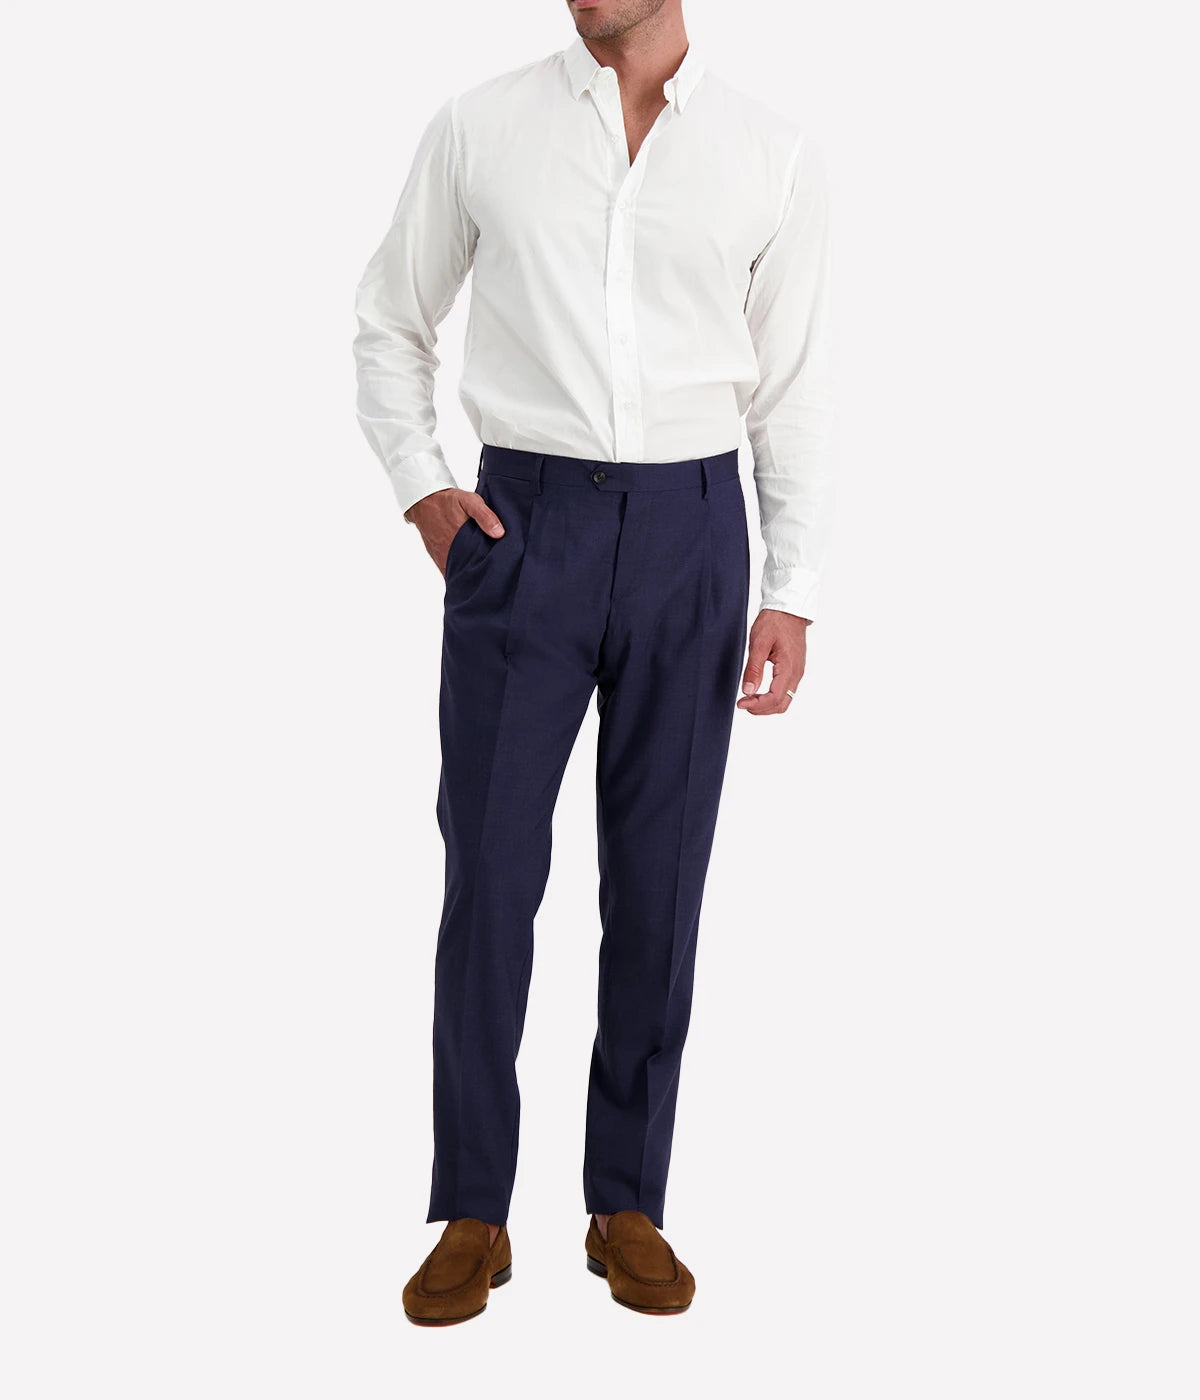 100% relaxed yet tailored trousers by Lardini with a single pleat and button fly closure.